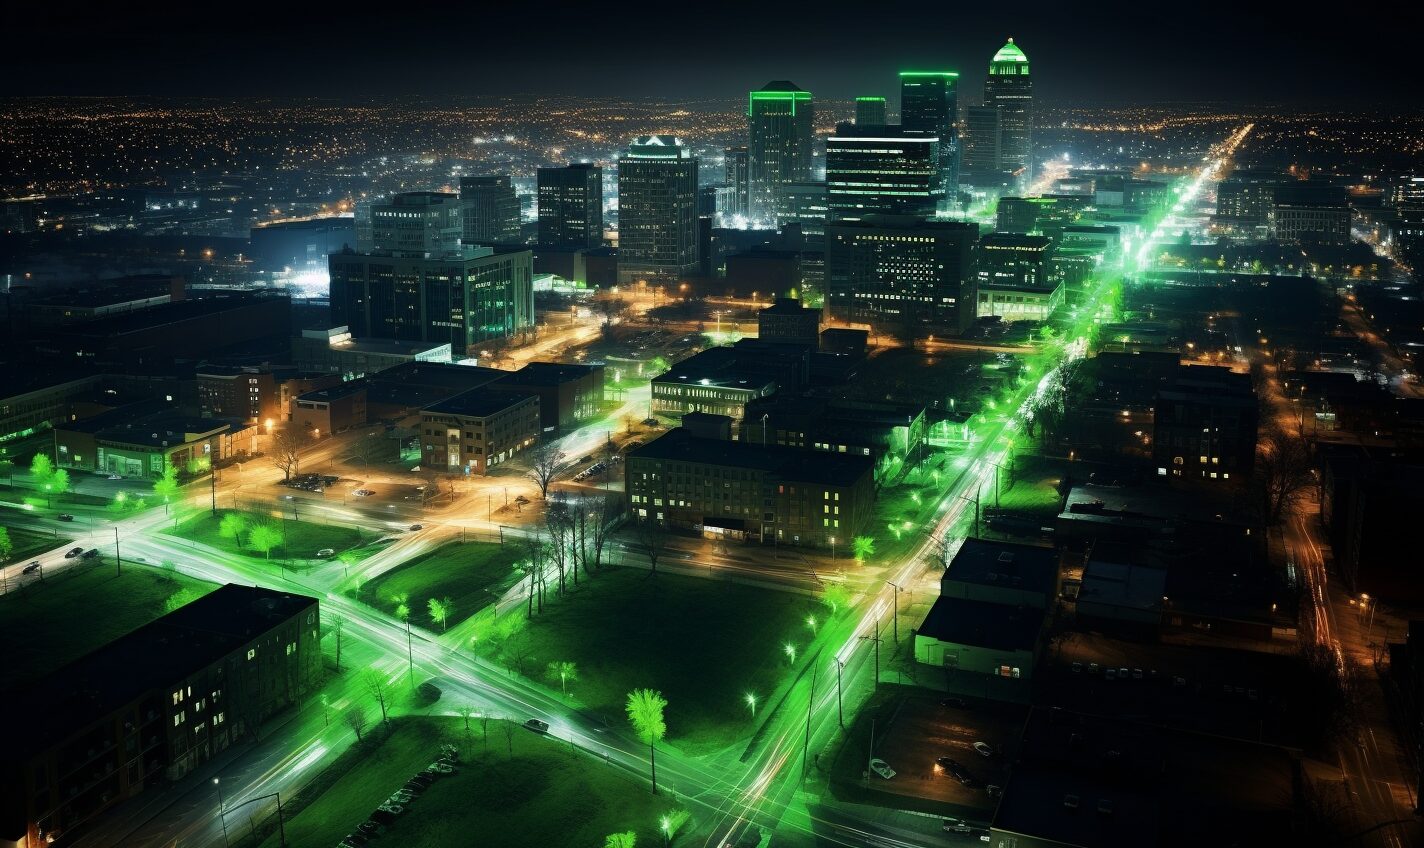 dayton, ohio in a black and neon green glow